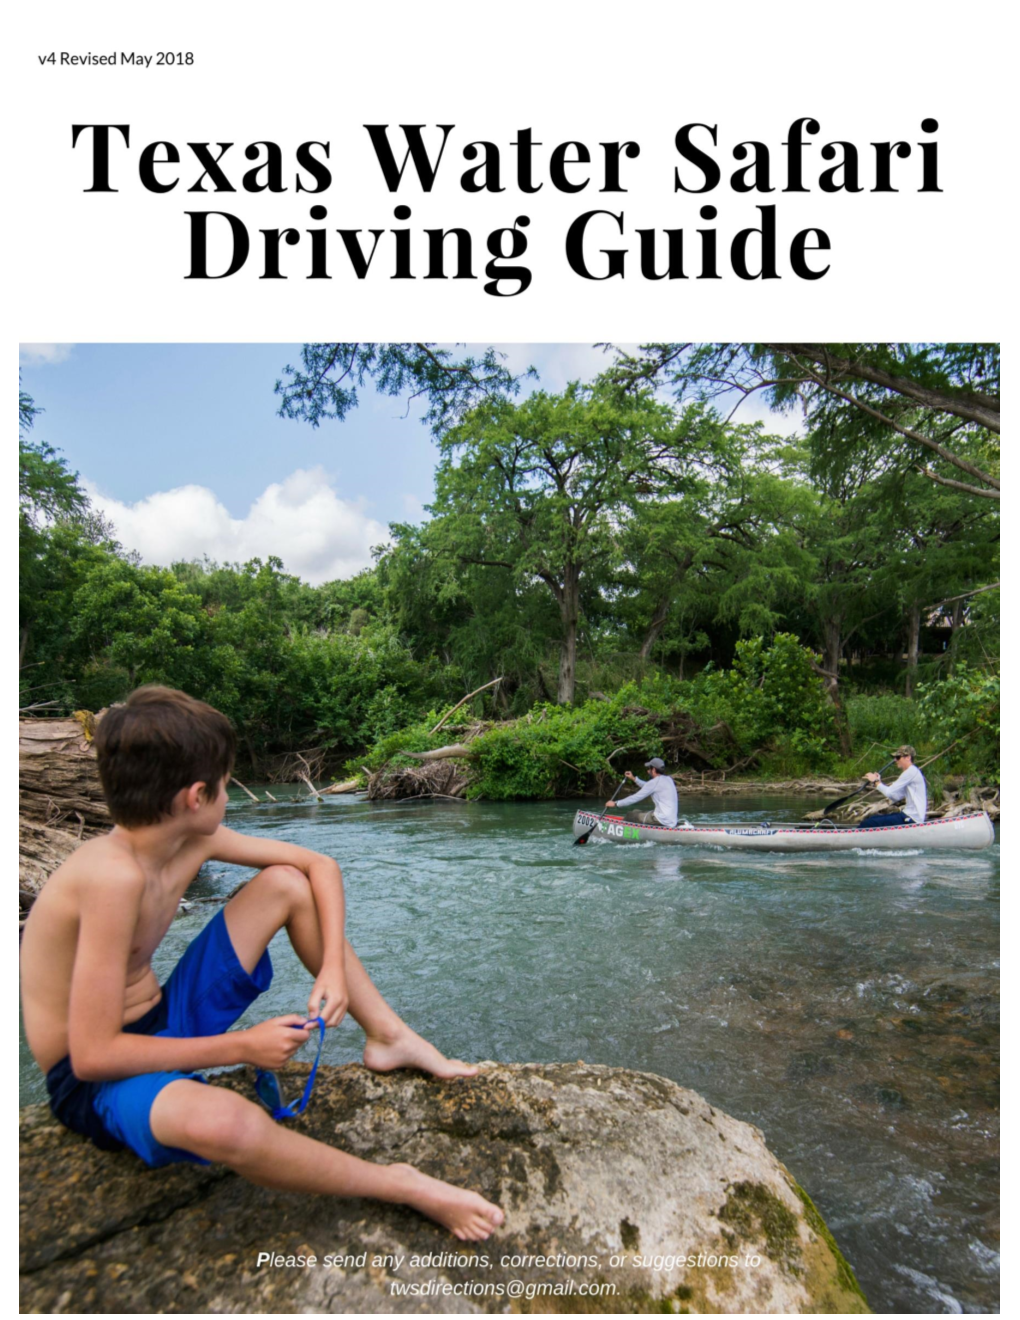 TWS Driving Guide